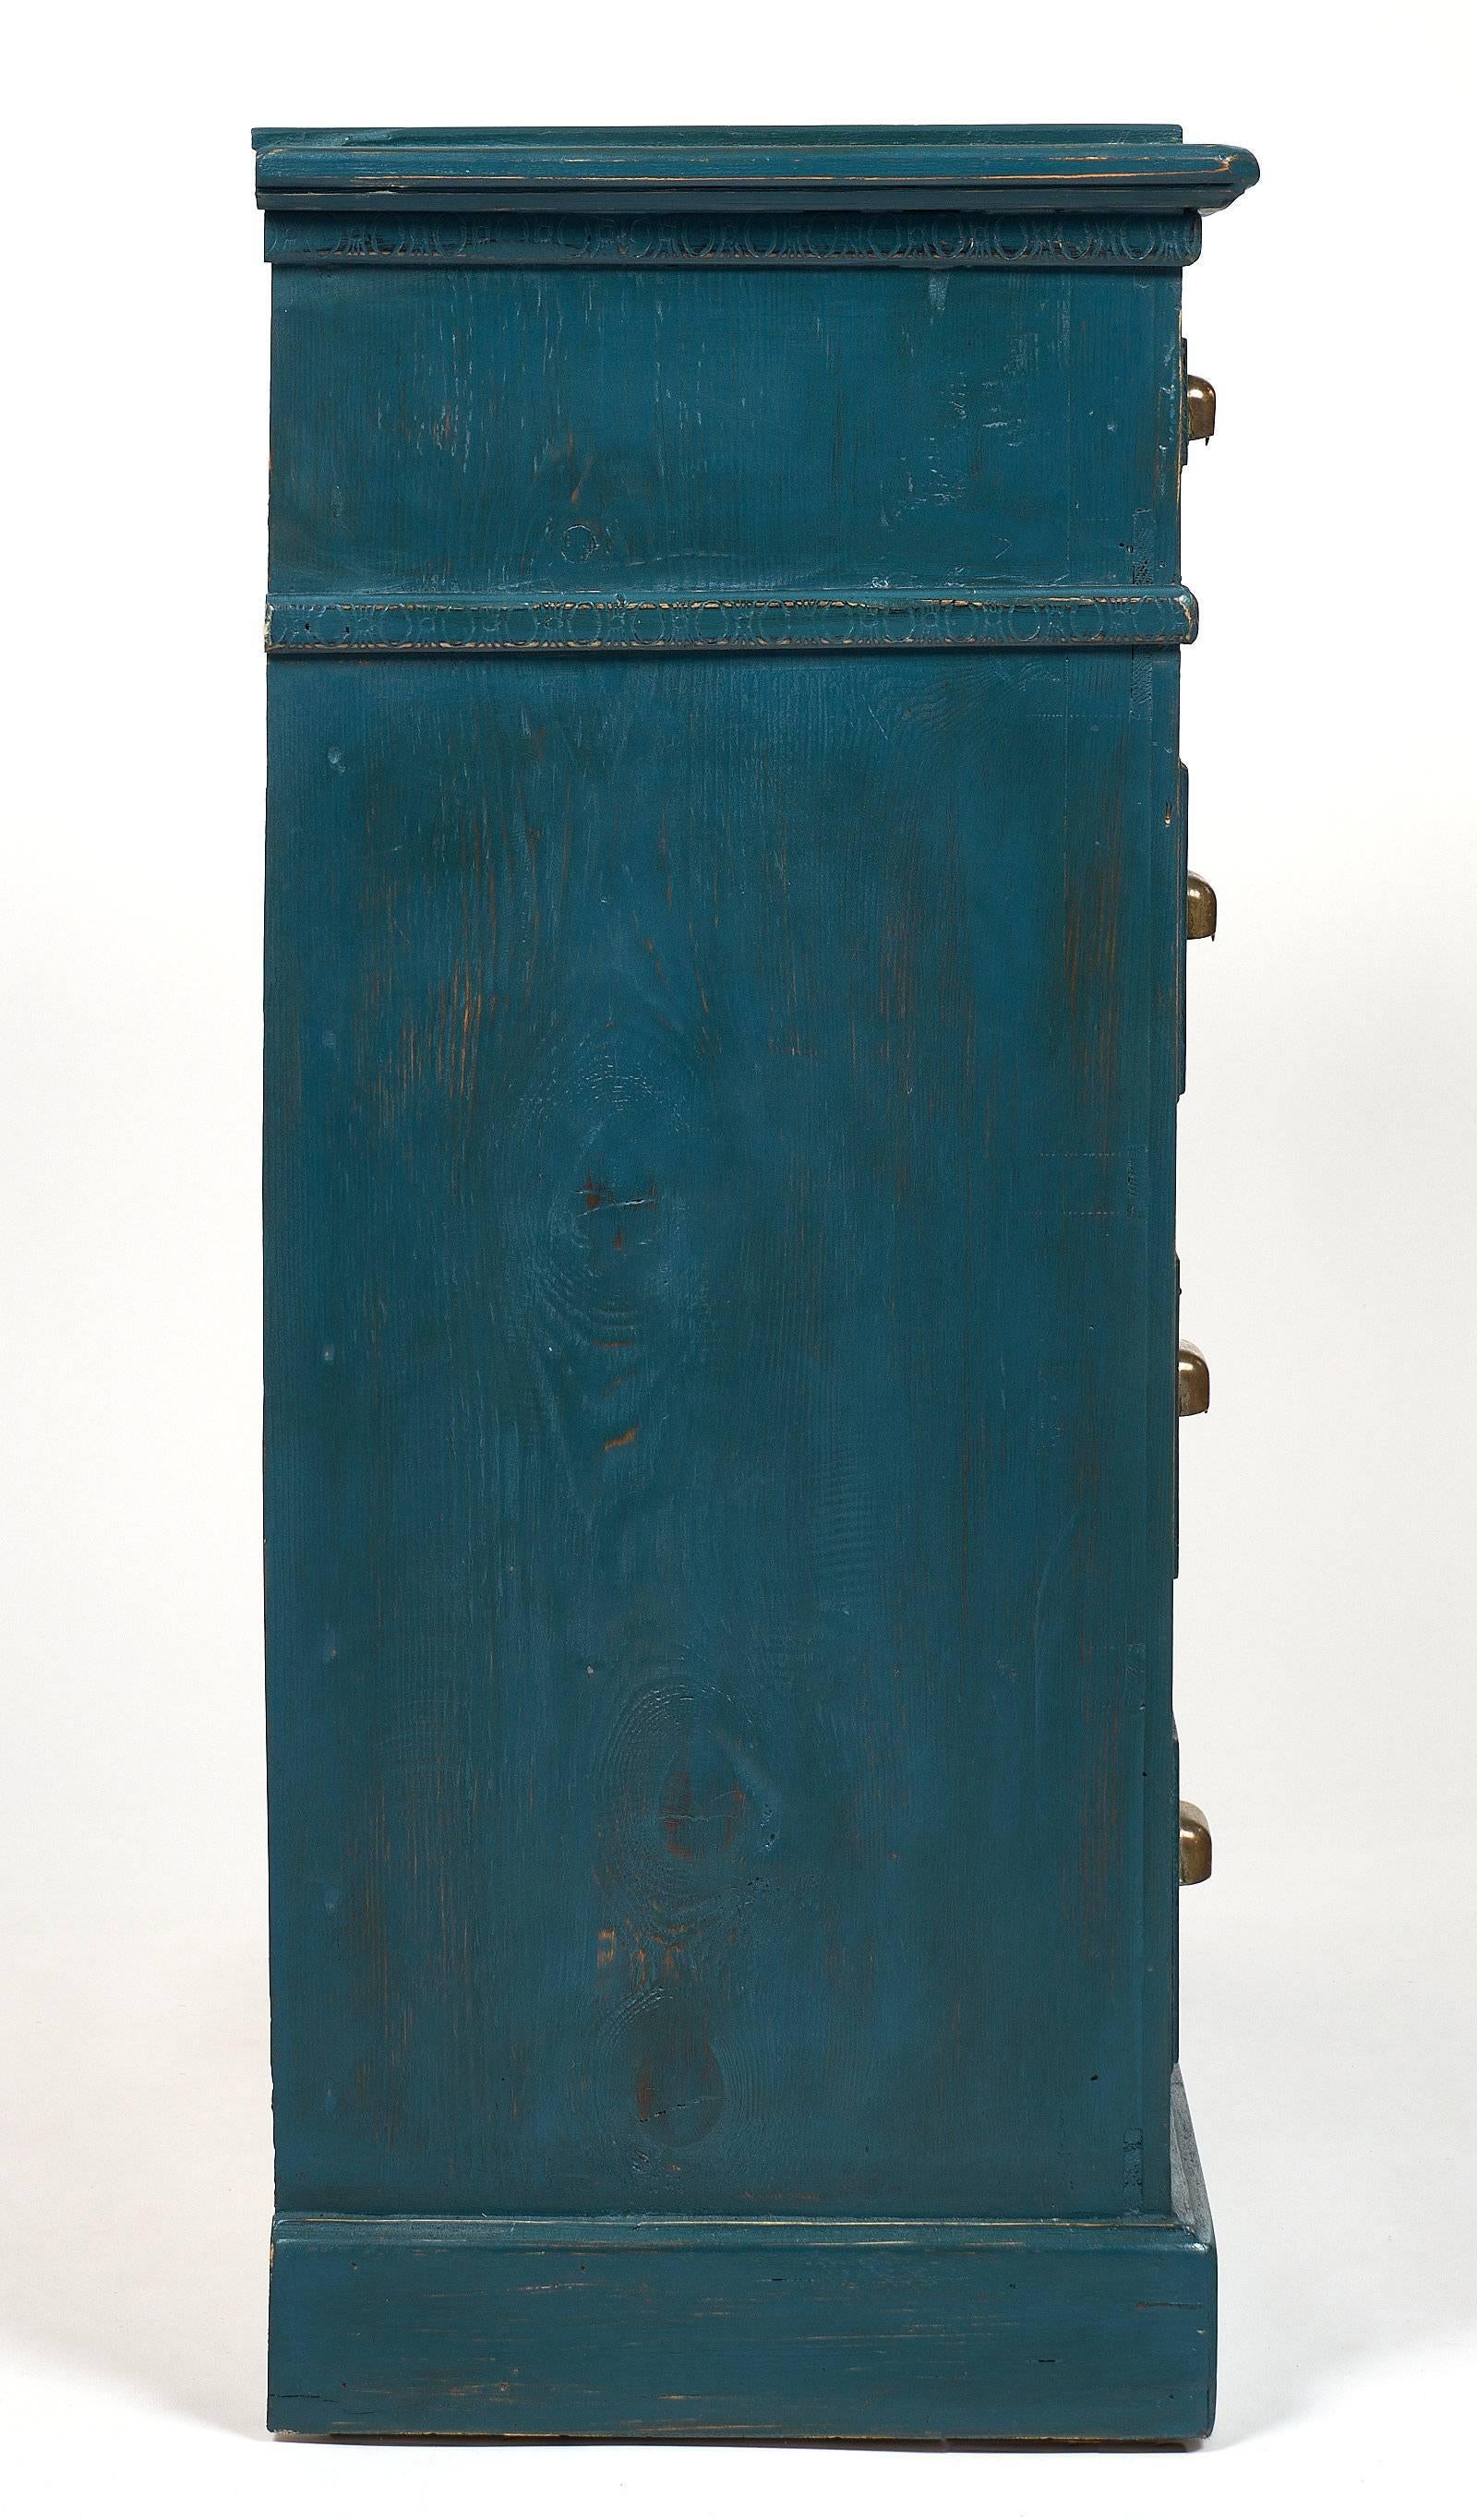 Teal Antique Apothecary Cabinet 1